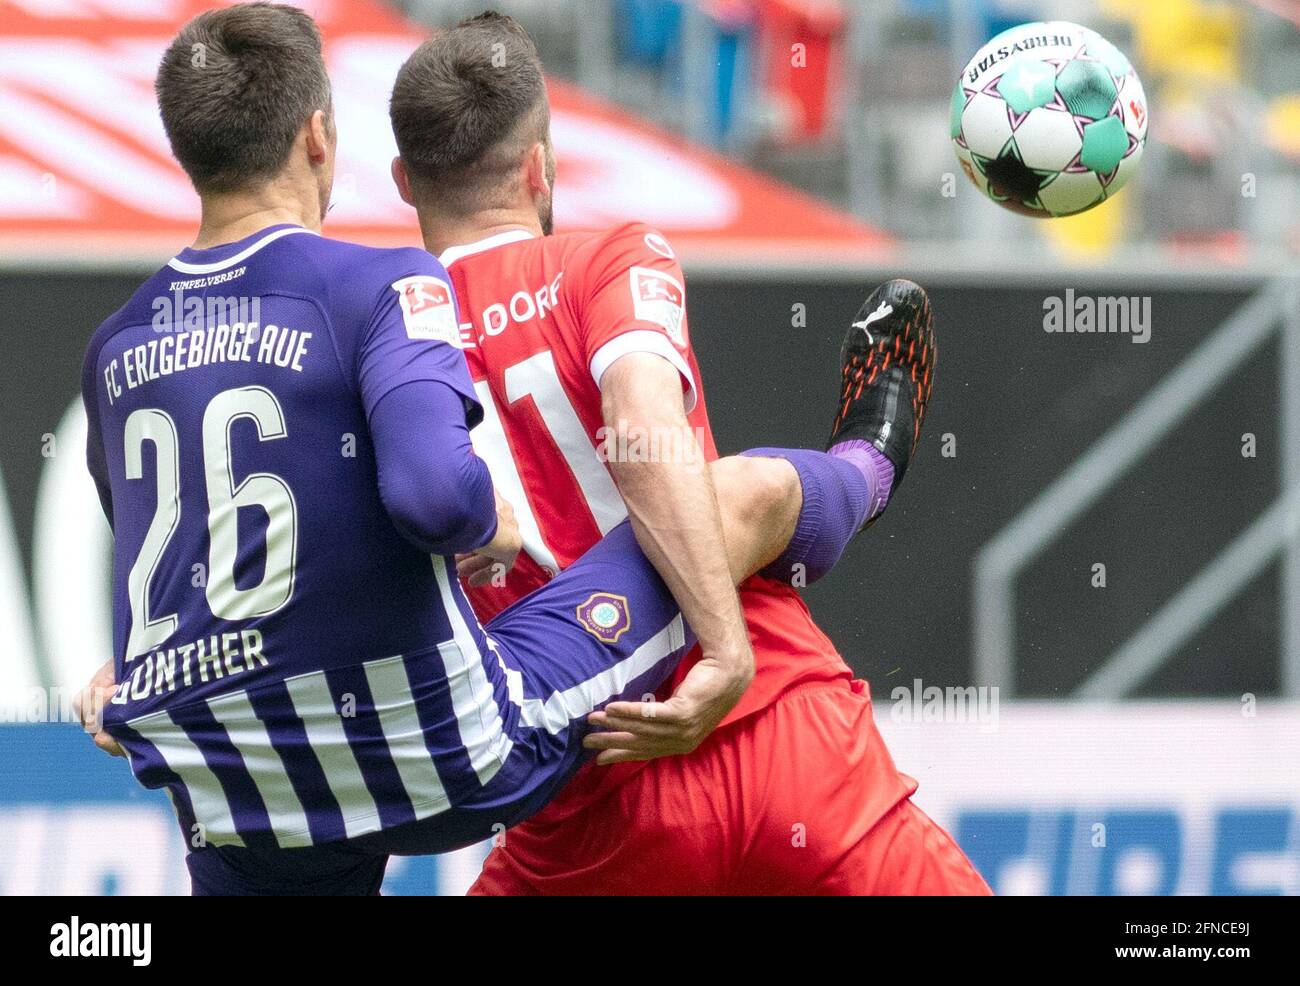 Duesseldorf, Germany. 16th May, 2021. Football: 2. Bundesliga, Fortuna Düsseldorf - Erzgebirge Aue, 33. matchday at Merkus Spiel-Arena: Düsseldorf's striker Kenan Karaman (r) and Aue's defender Sören Gonther. Credit: Bernd Thissen/dpa - IMPORTANT NOTE: In accordance with the regulations of the DFL Deutsche Fußball Liga and/or the DFB Deutscher Fußball-Bund, it is prohibited to use or have used photographs taken in the stadium and/or of the match in the form of sequence pictures and/or video-like photo series./dpa/Alamy Live News Stock Photo